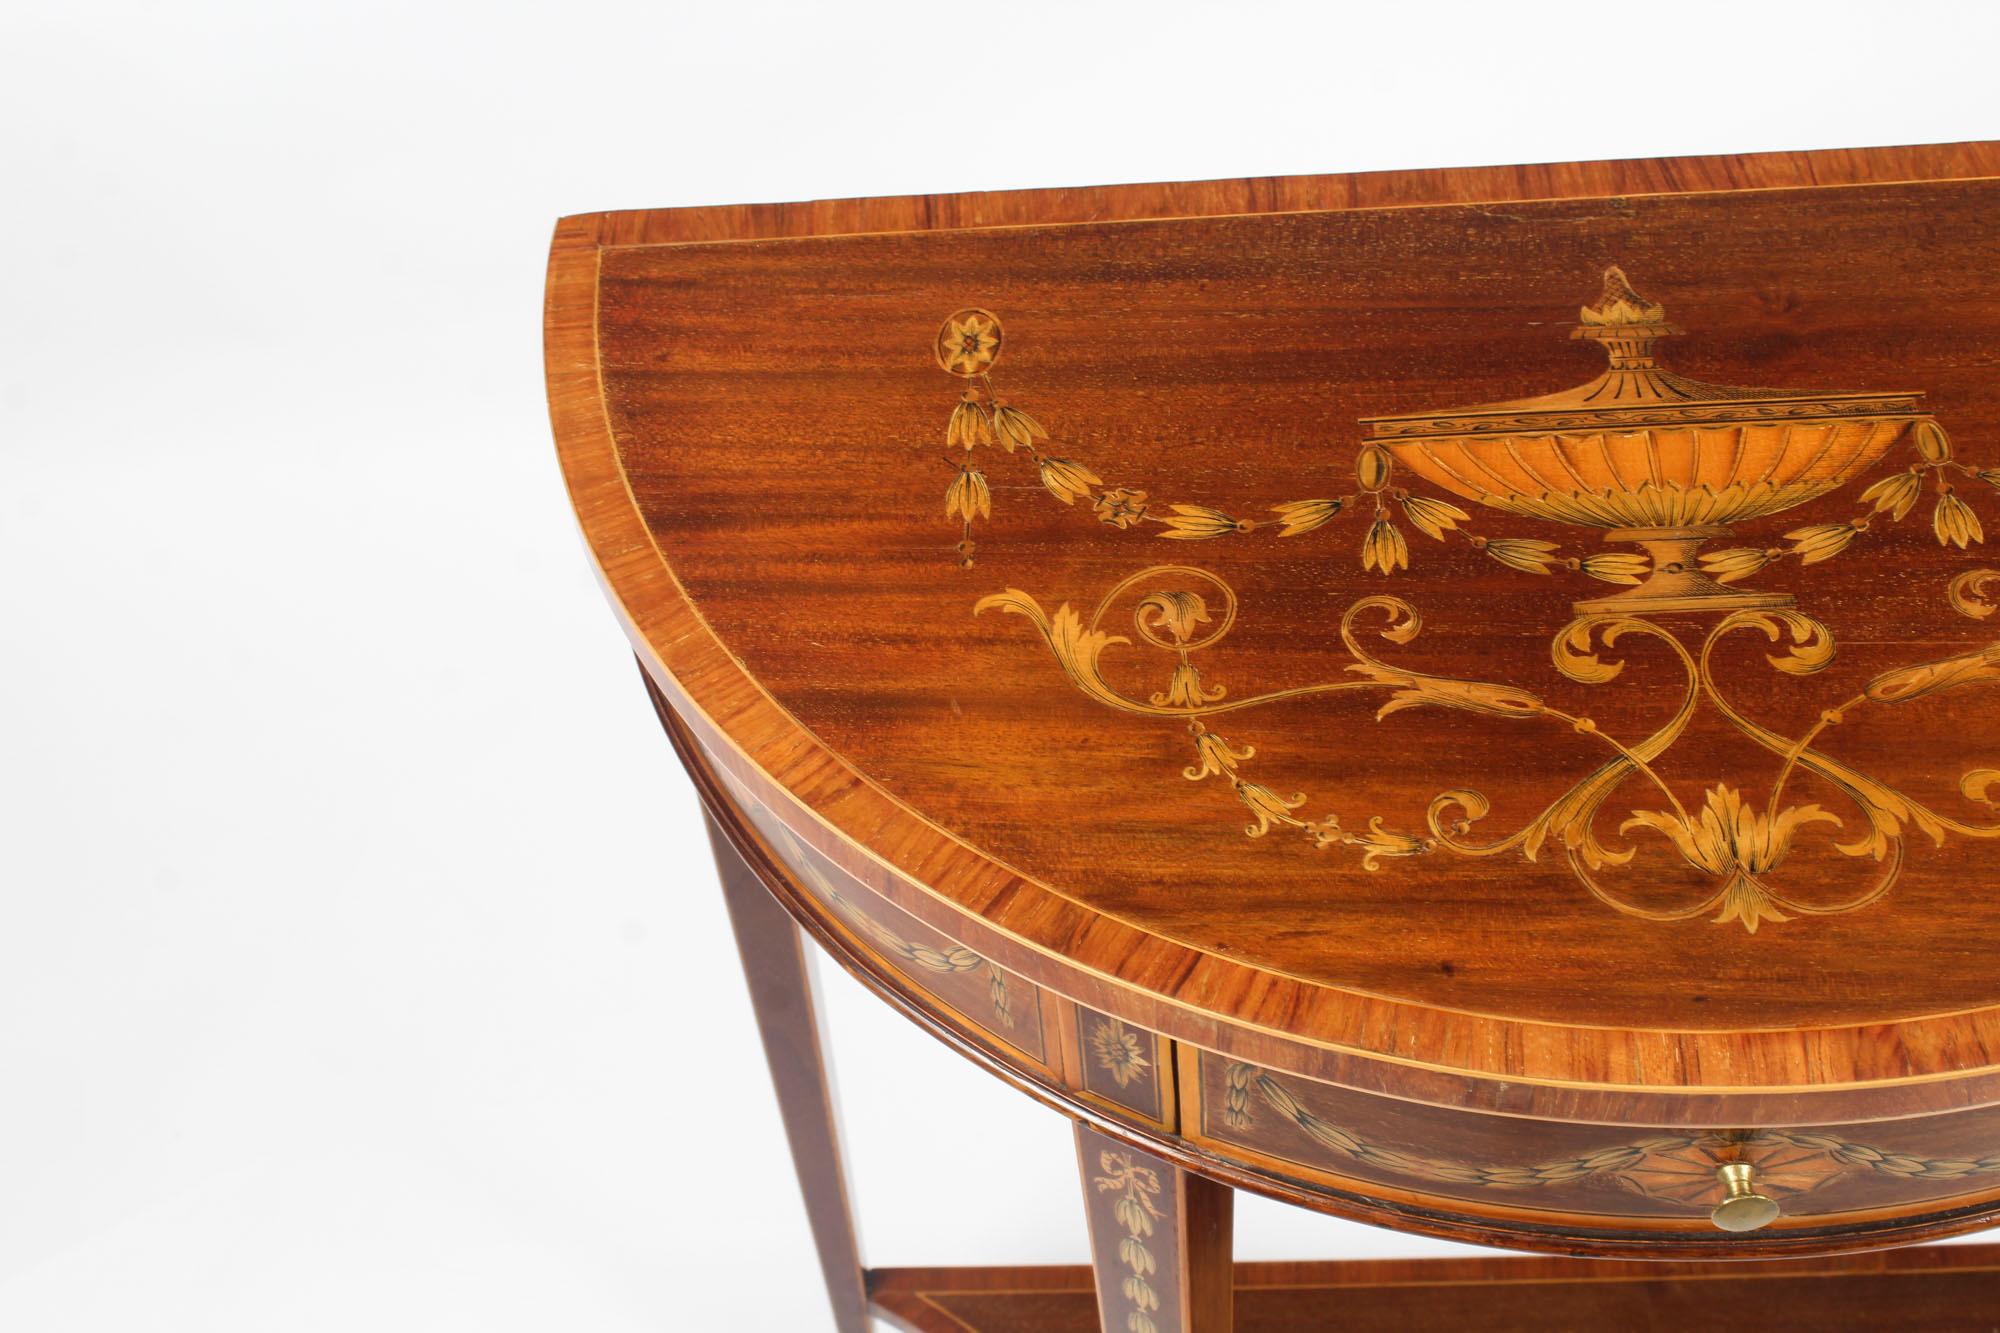 English Antique Regency Revival Marquetry Console Table, 19th Century